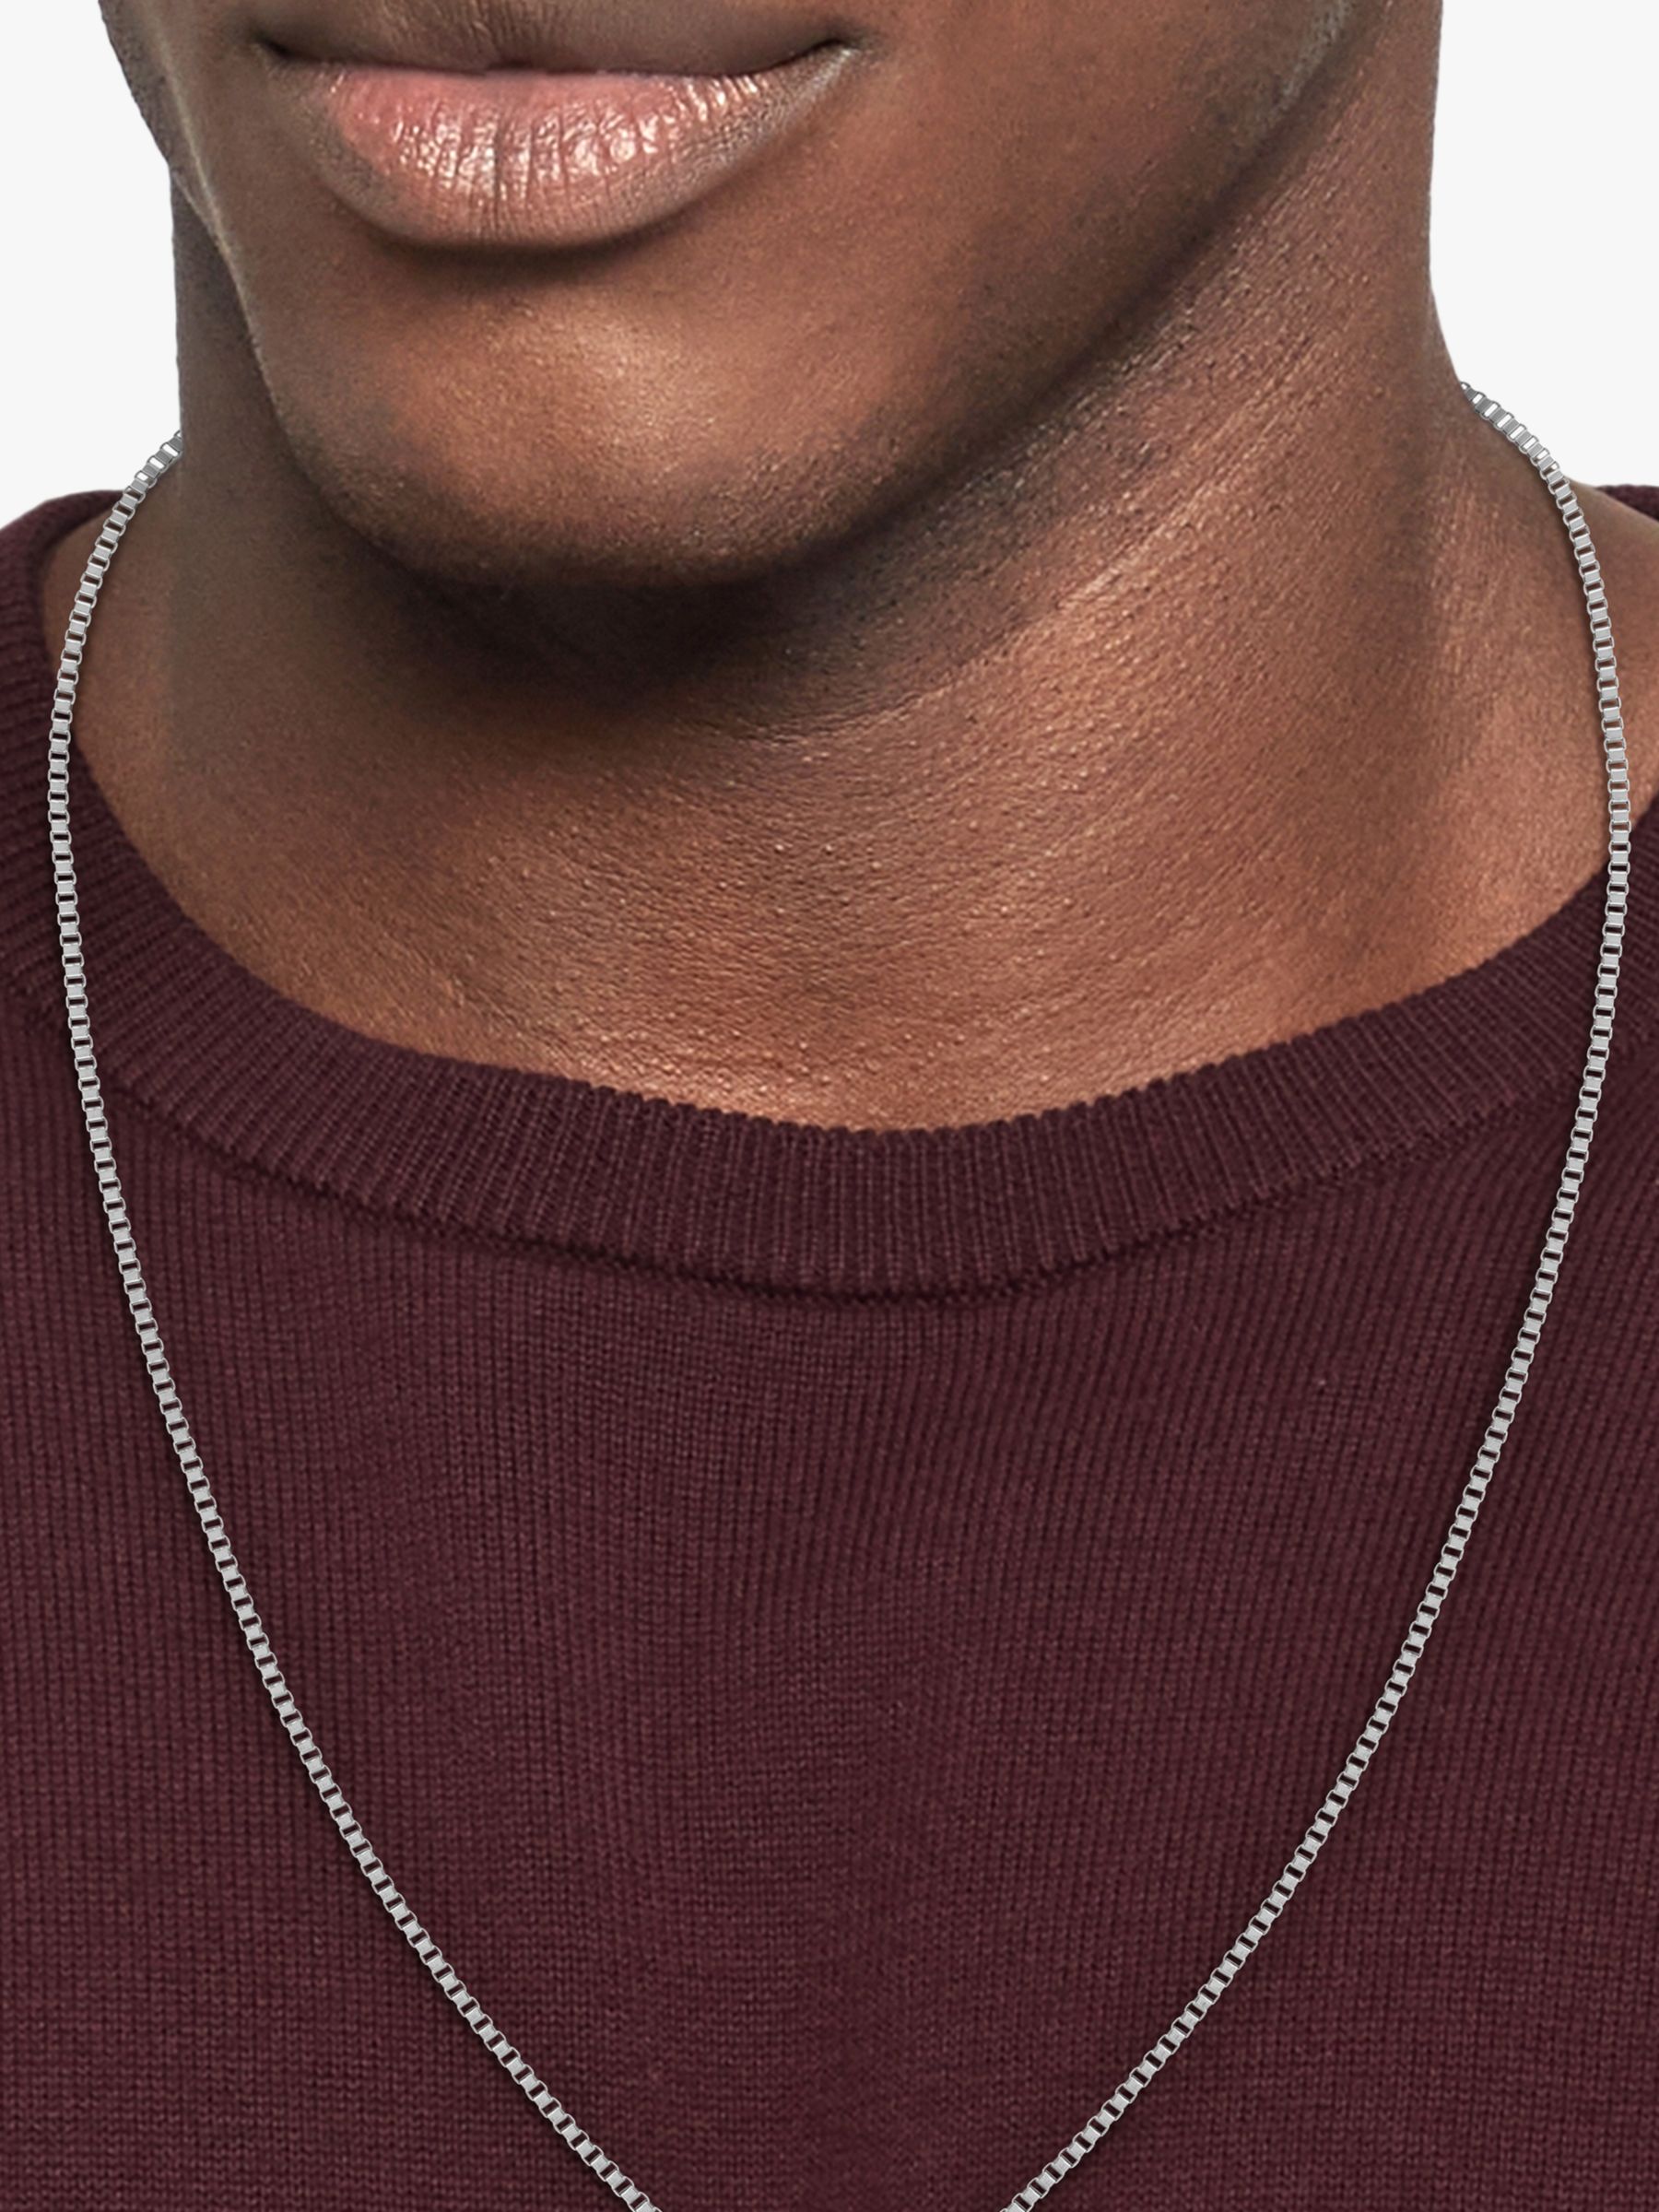 Tommy Hilfiger Men's Monogram Tag Chain Necklace, Silver at John Lewis &  Partners